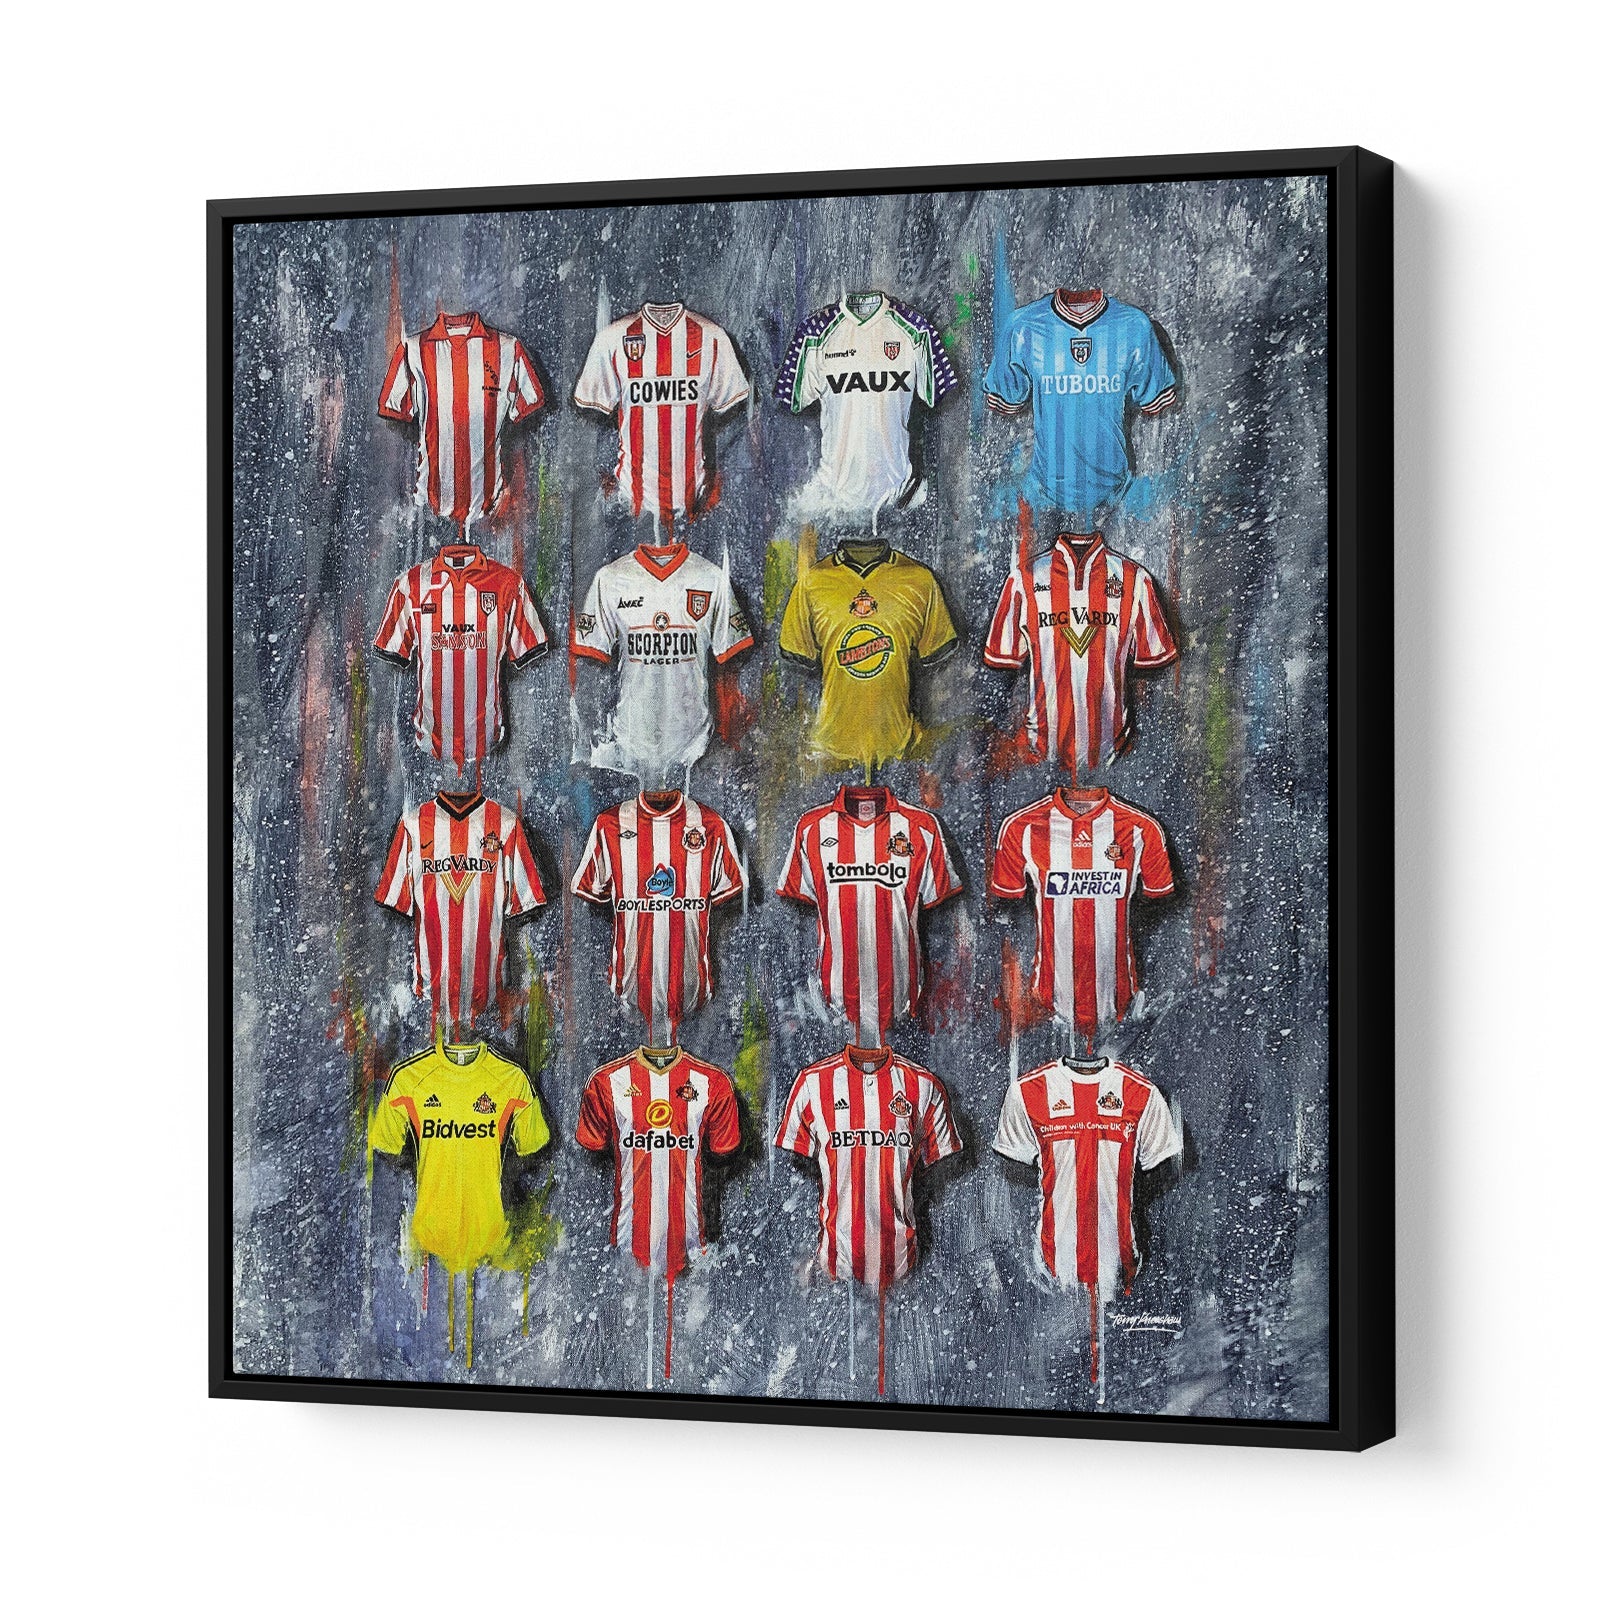 Transform any wall into a Sunderland fan zone with these stunning canvases from Terry Kneeshaw. These canvases feature various artwork of the Sunderland team, and come in various sizes: 20x20, 30x30, or 40x40, and in either a framed or unframed black floating frame. Whether you are looking to decorate your home, office, or man cave, these canvases are perfect for any Sunderland fan looking to show their support for the team.